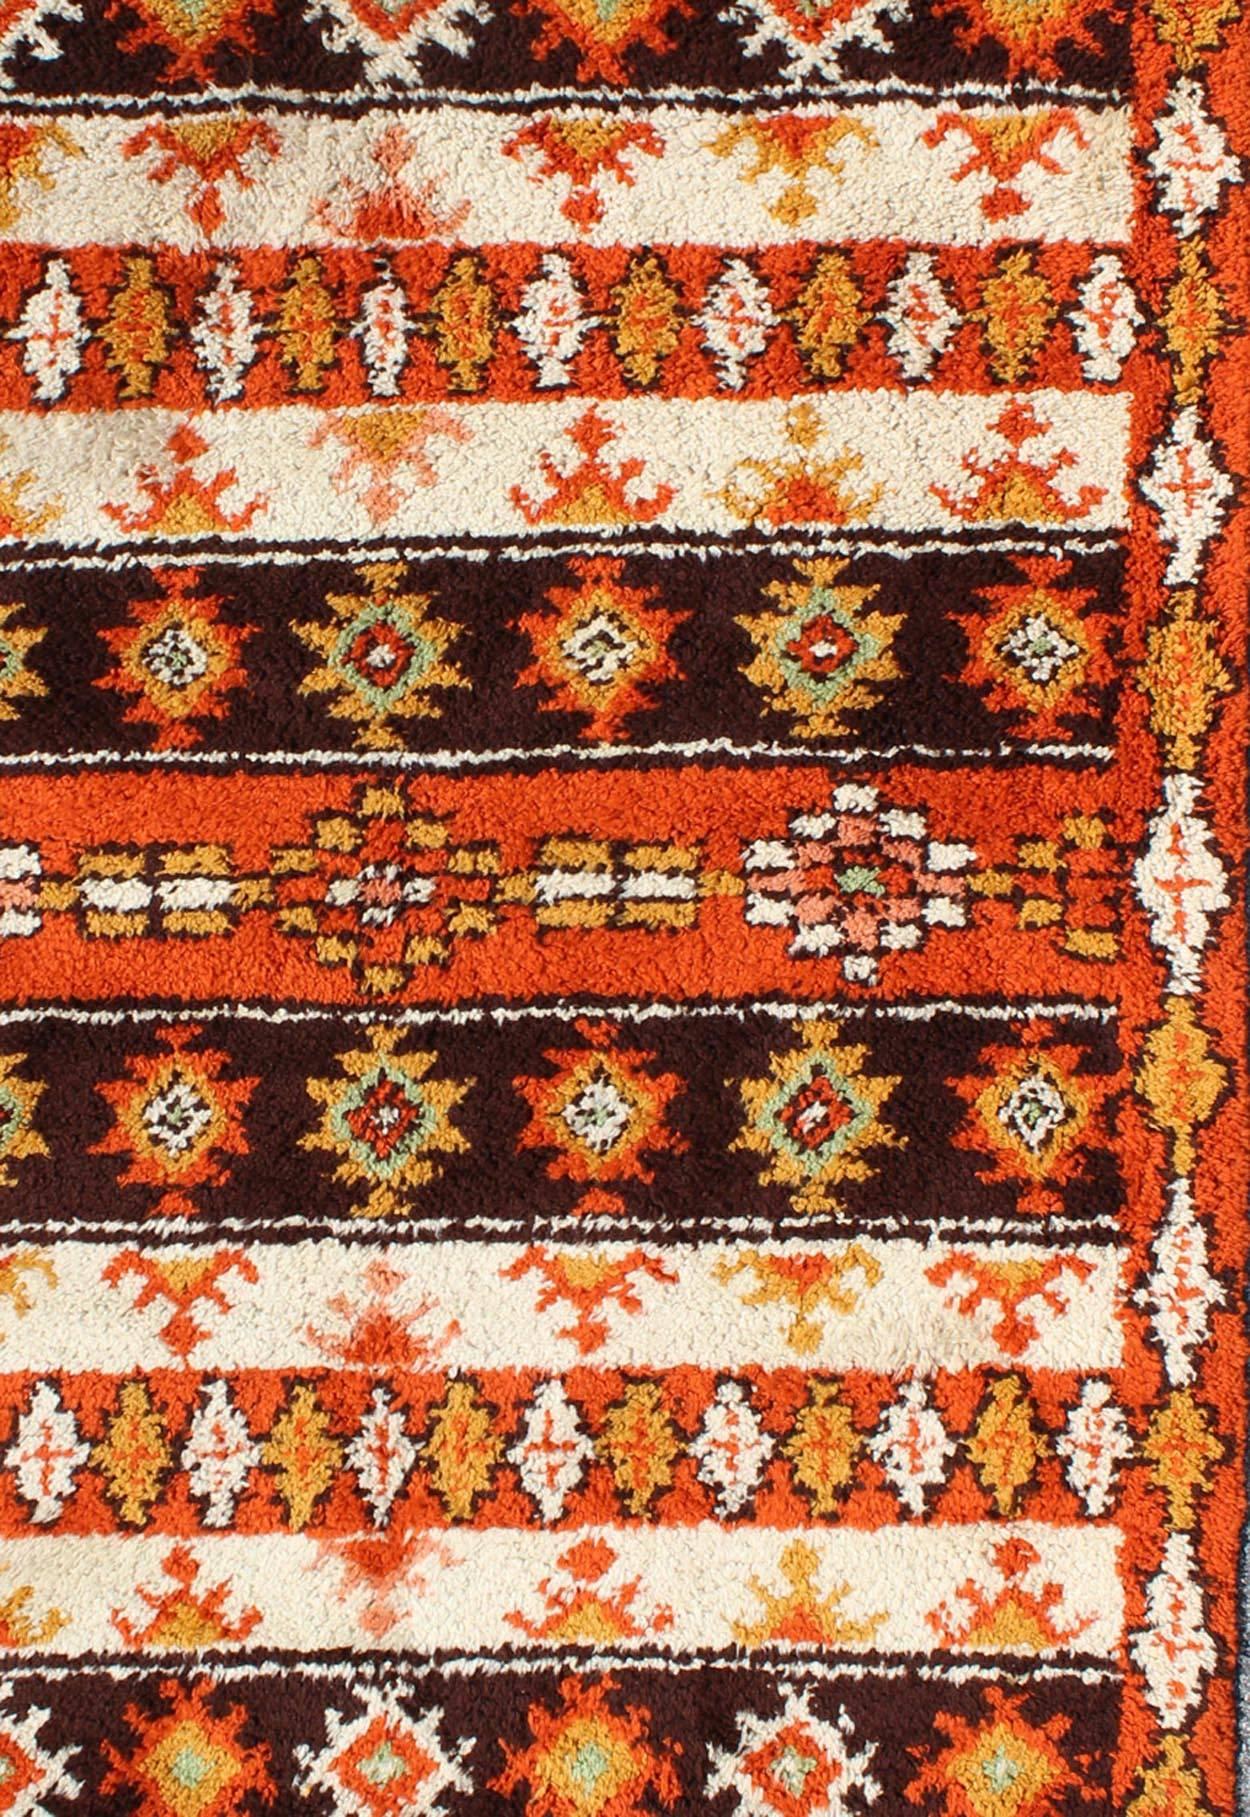 Vintage Moroccan Rug with Stripes & Tribal Design in Orange, D. Brown, Ivory In Good Condition For Sale In Atlanta, GA